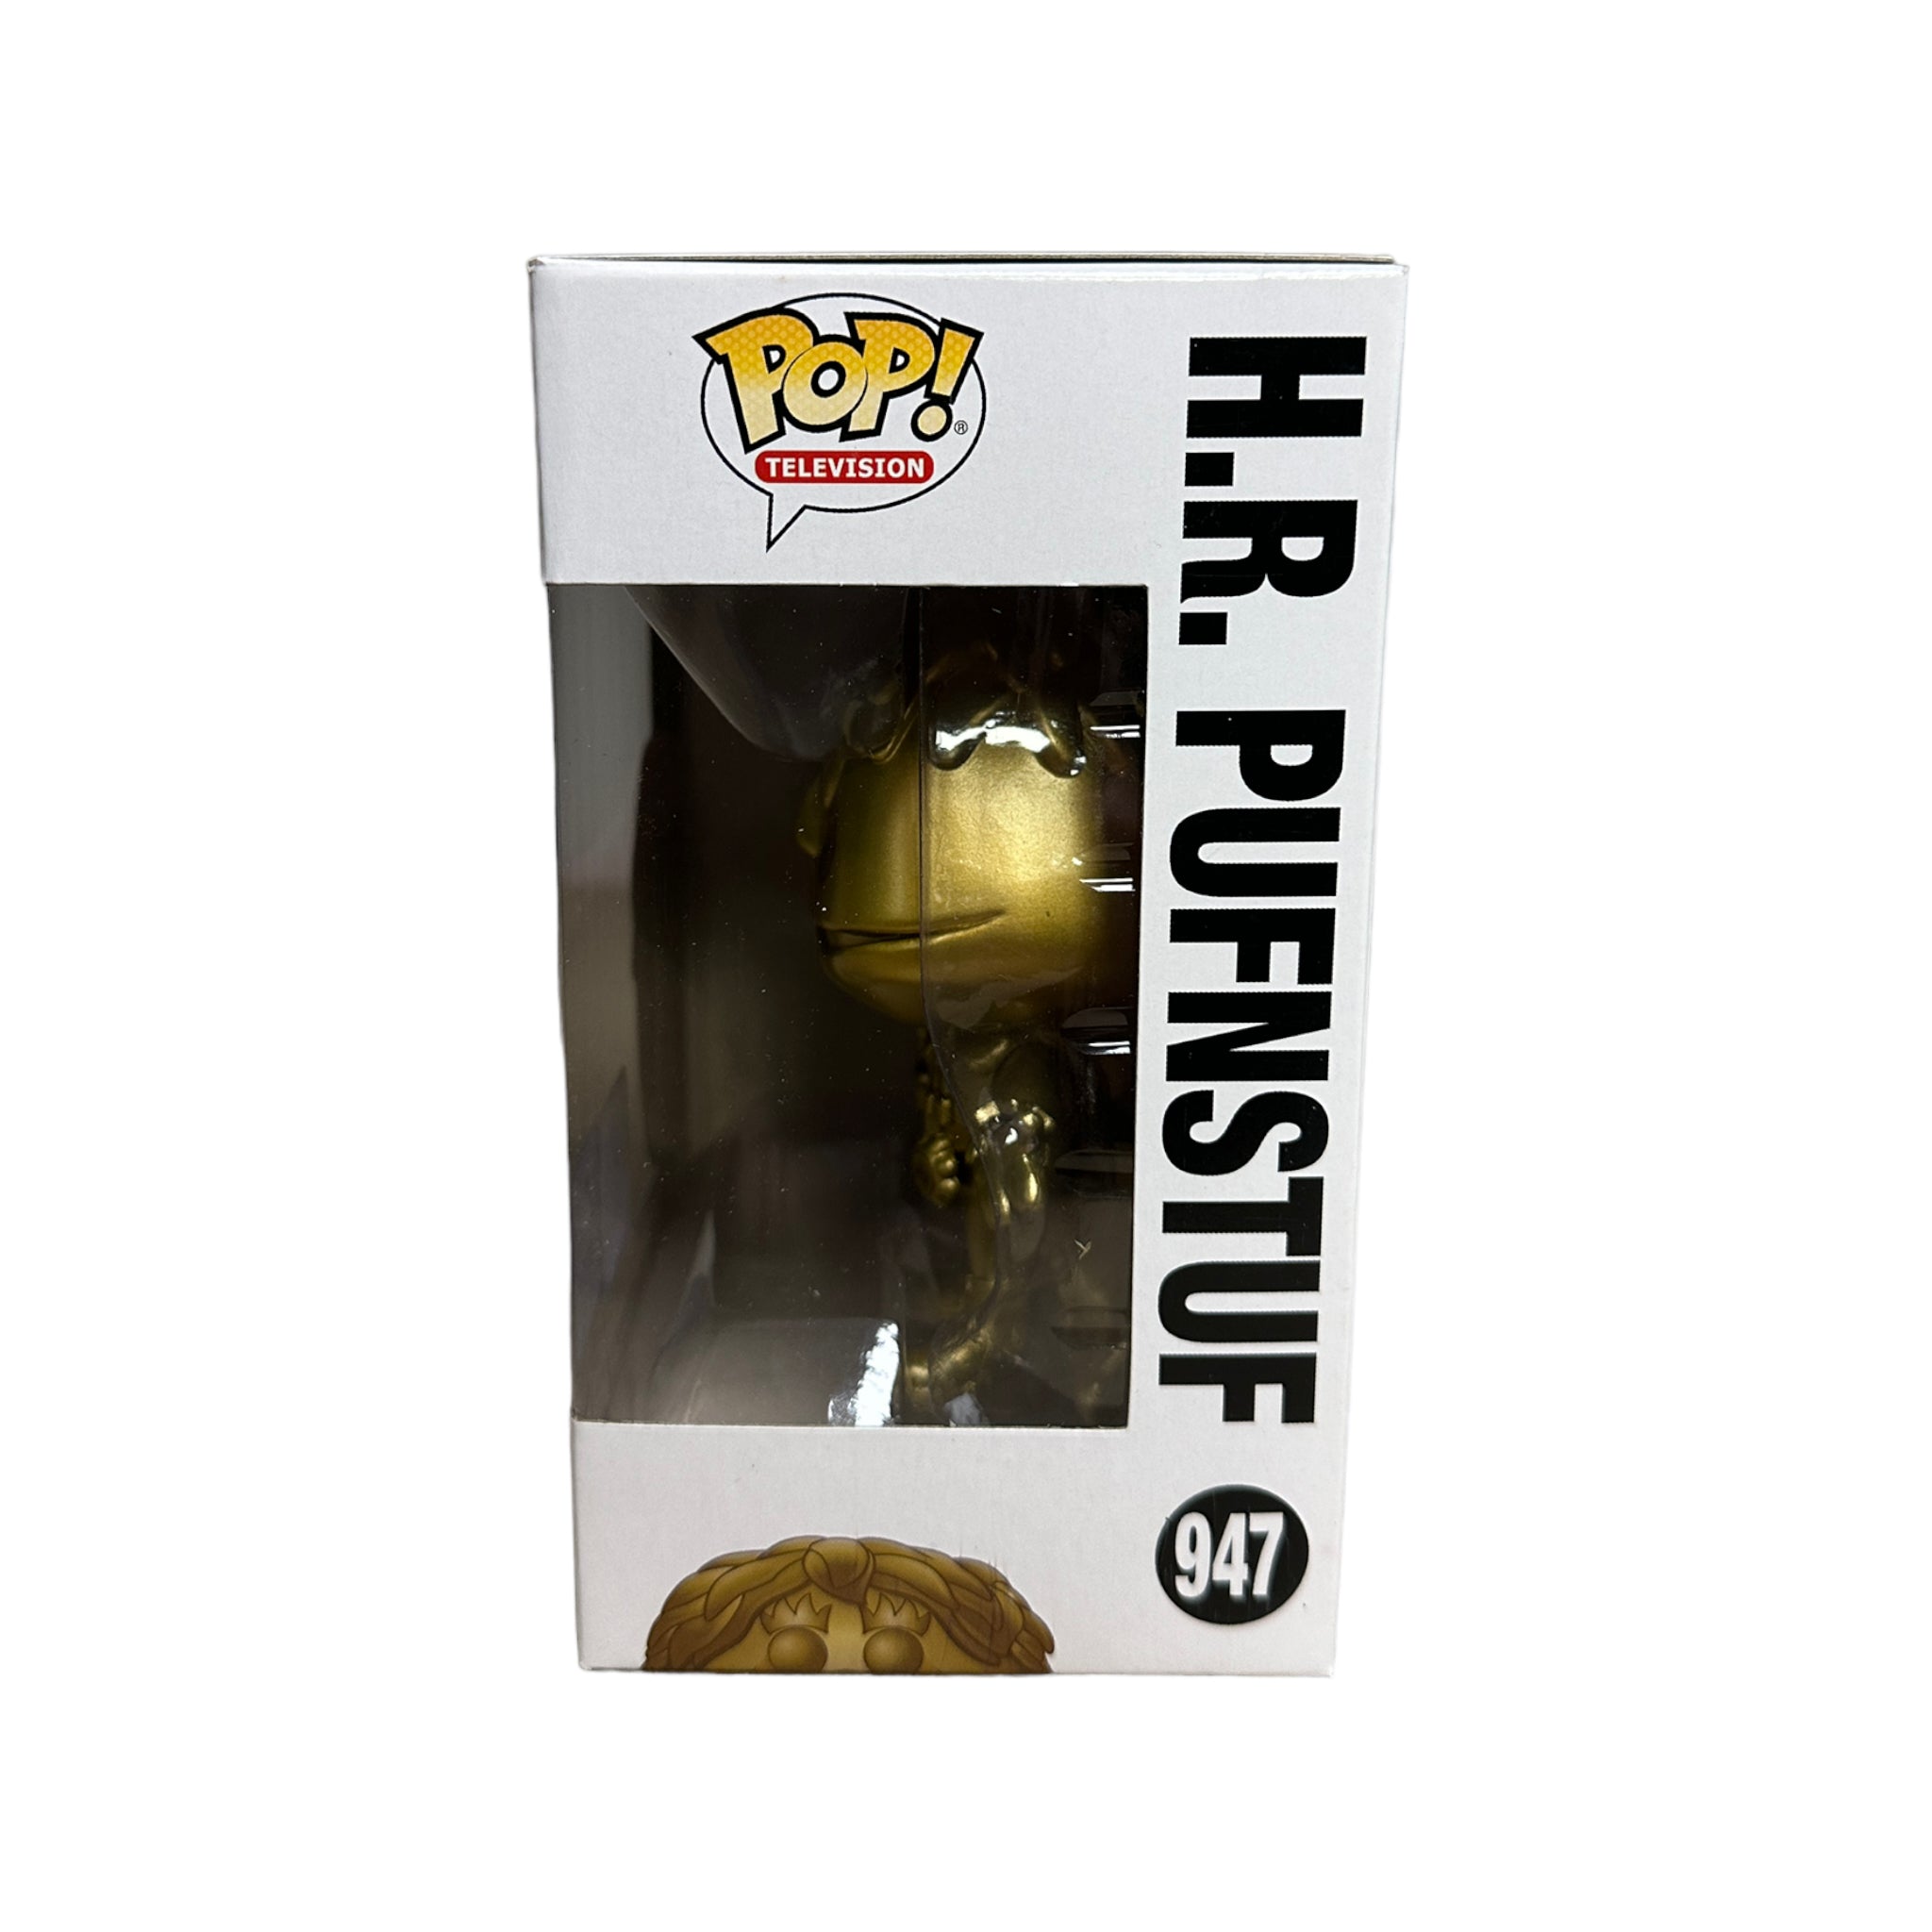 H.R. Pufnstuf #947 (Gold Metallic) Funko Pop! - Sid & Marty Krofft Pictures - Funko Hollywood Exclusive - Condition 6.5/10